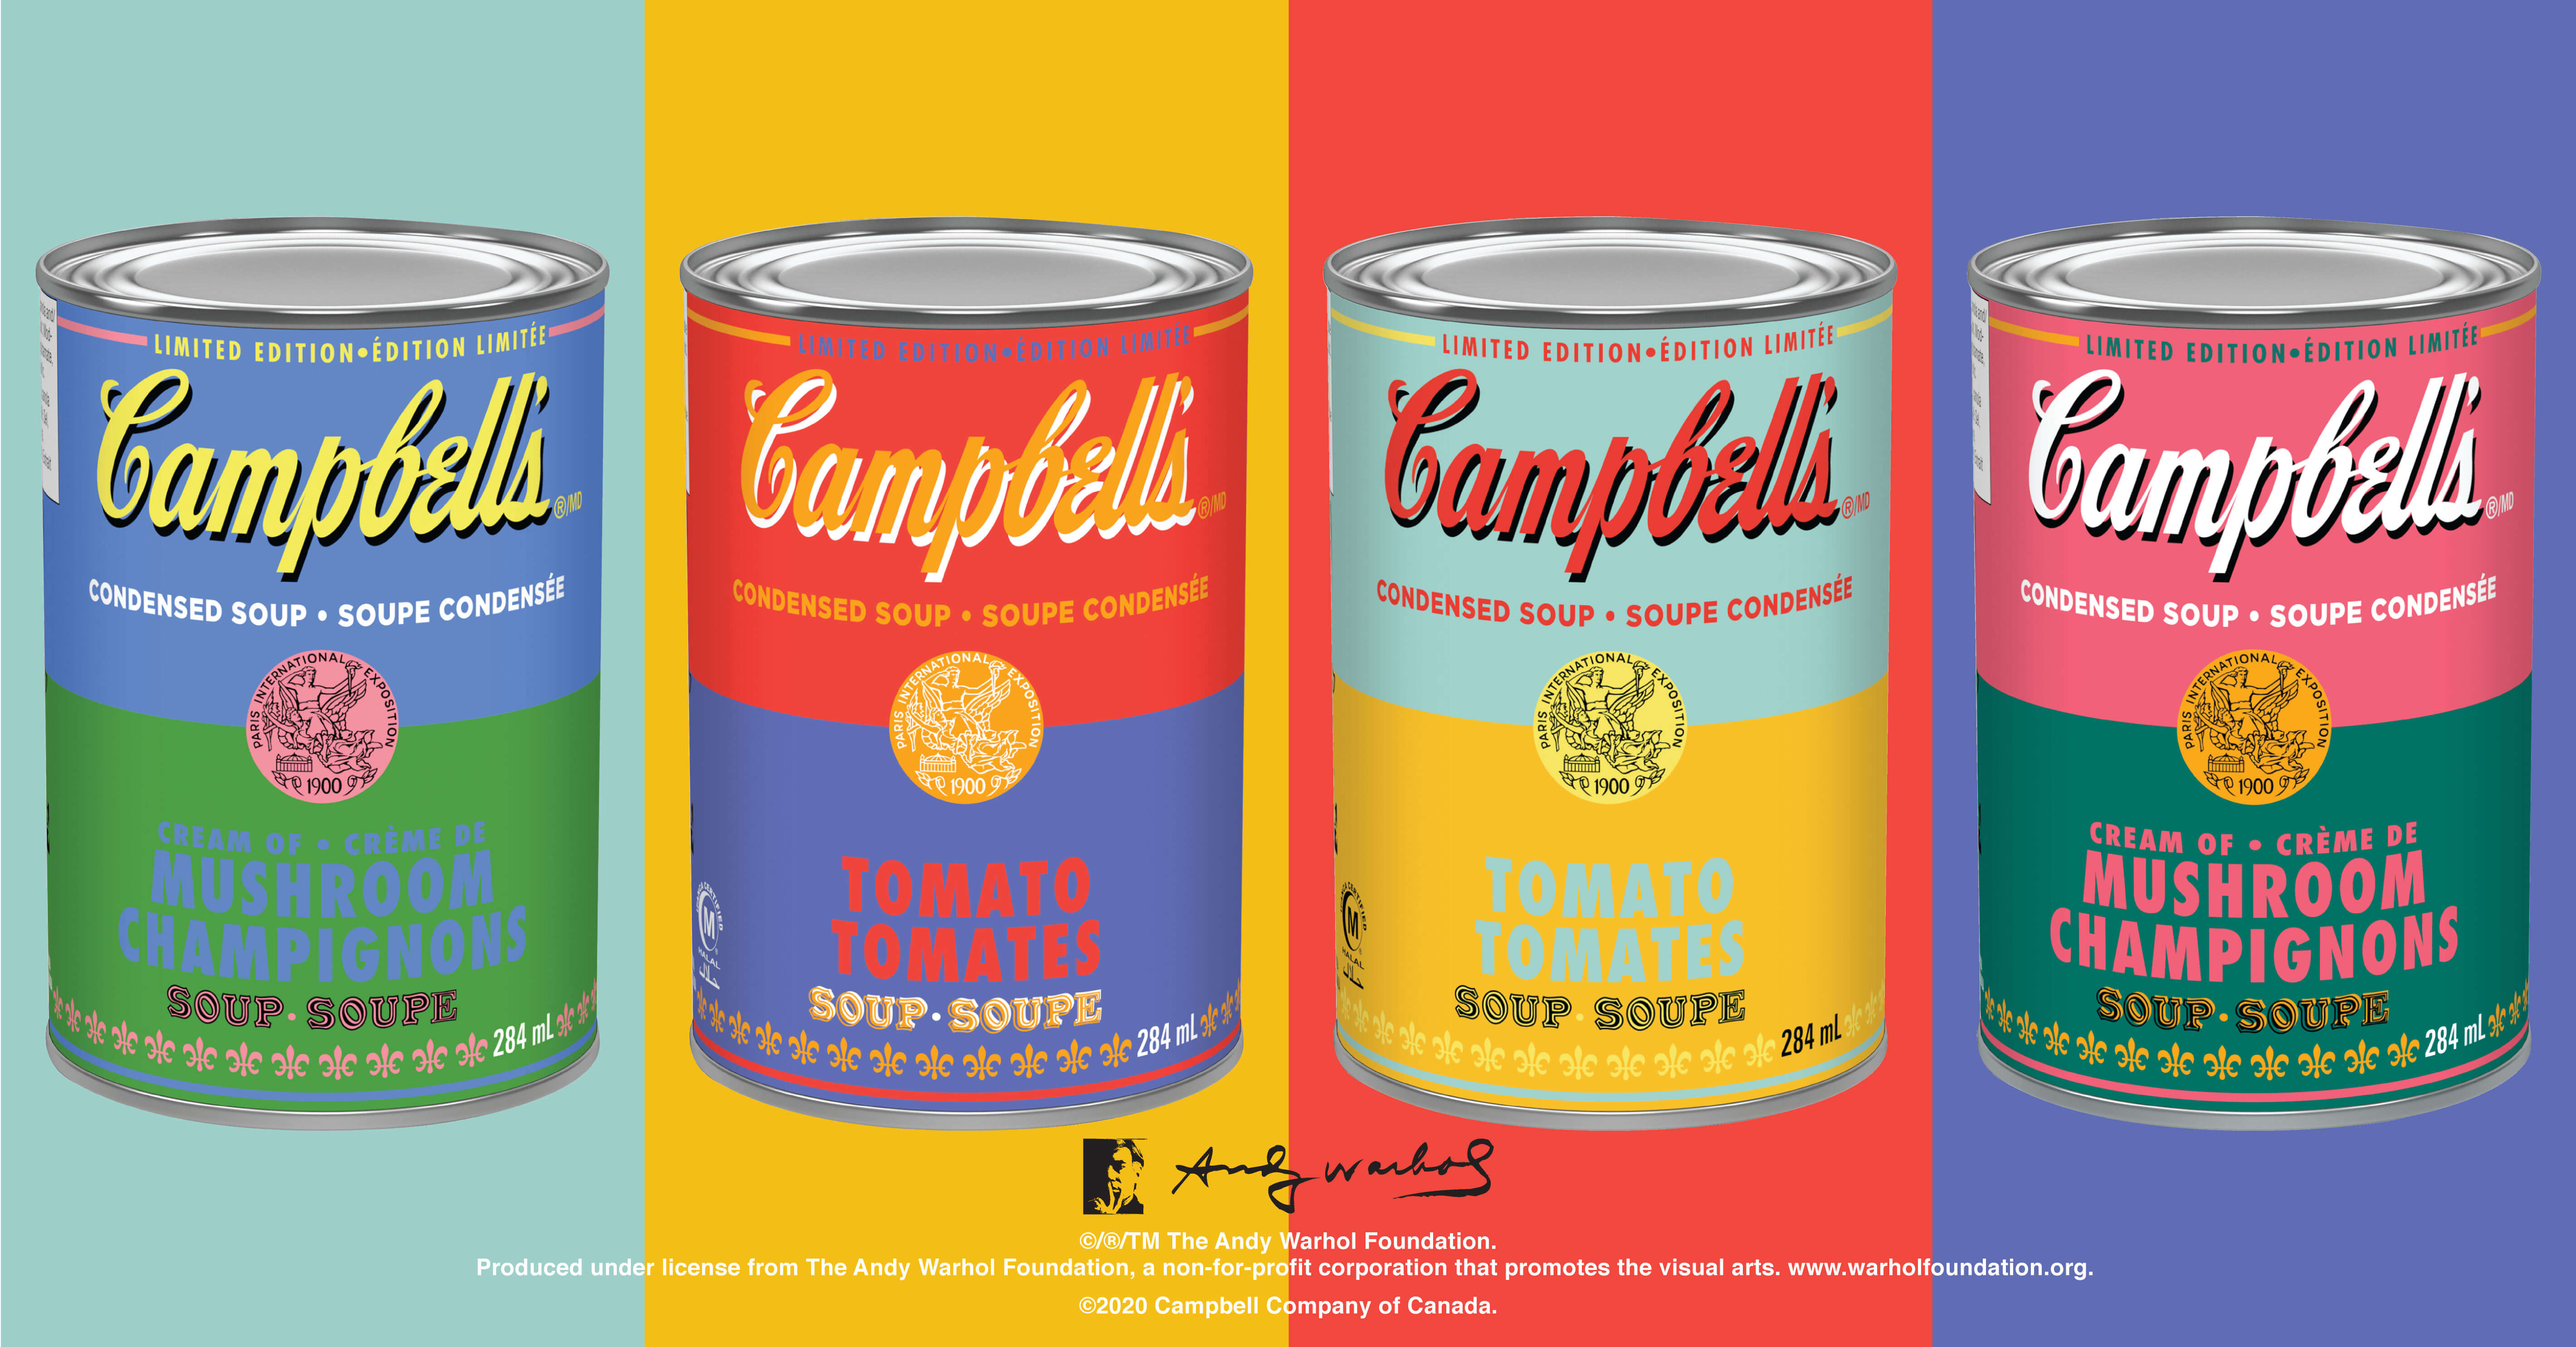 Campbell's Warhol collection of soup cans